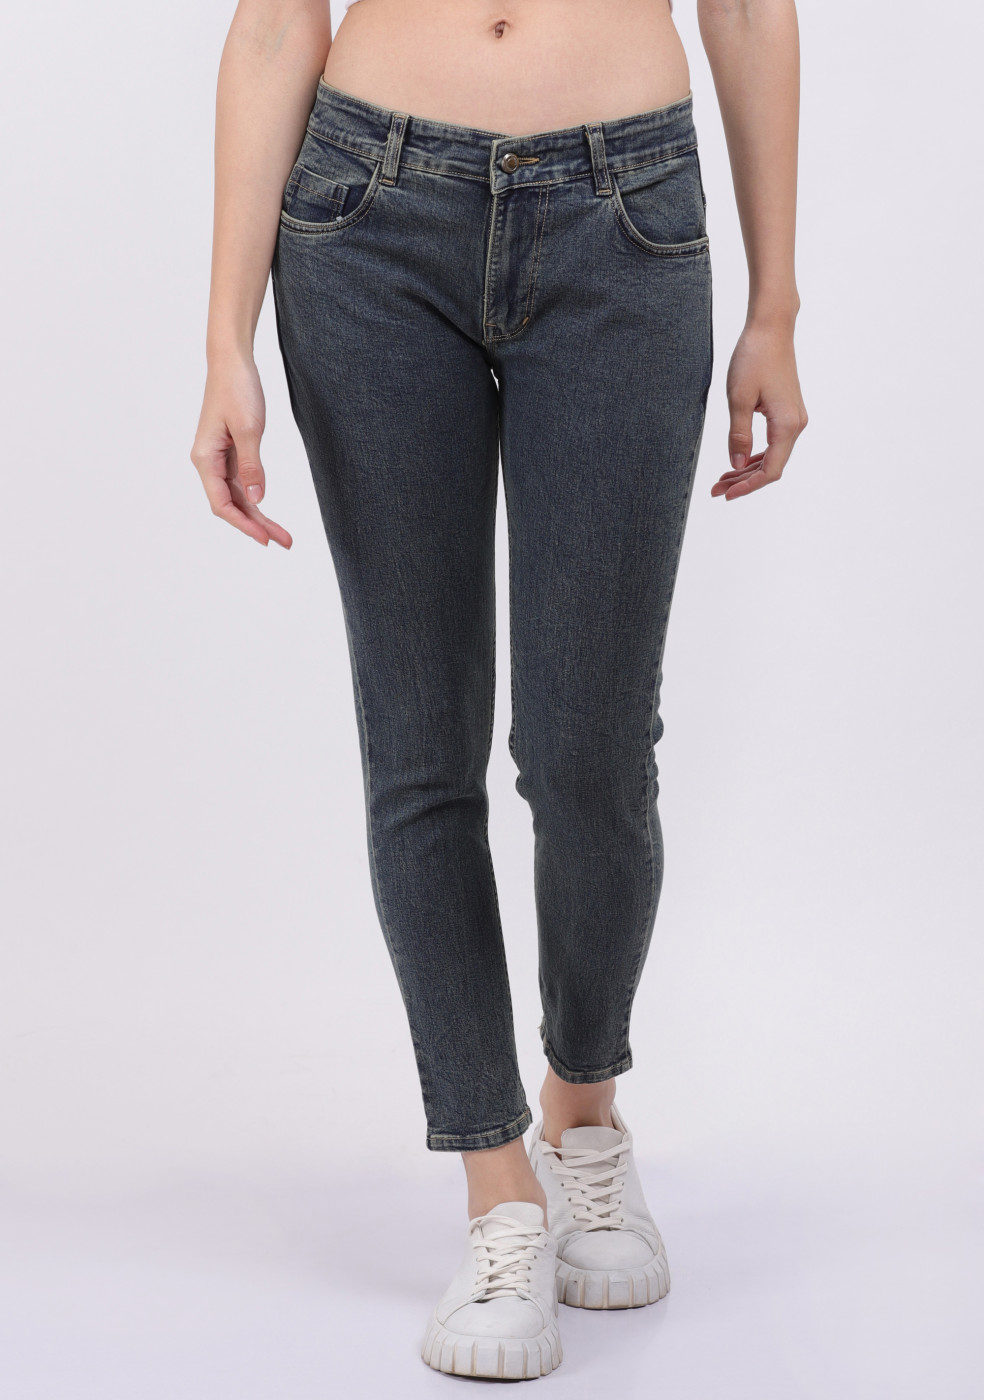 TINT Comfortable Jeans For Women